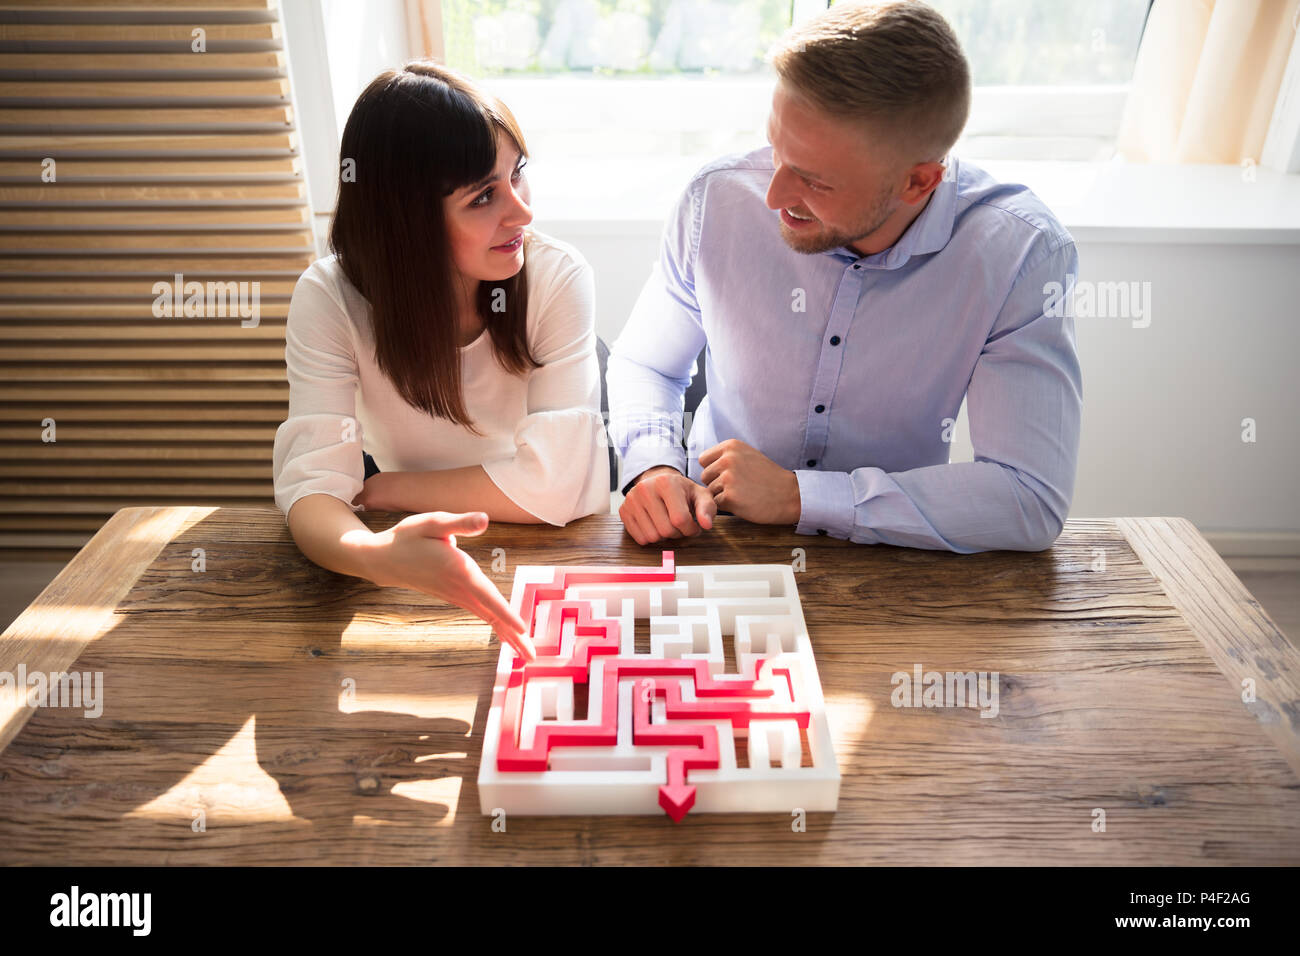 Two Young Businesspeople Solving Maze Puzzle Over Wooden Desk Stock Photo